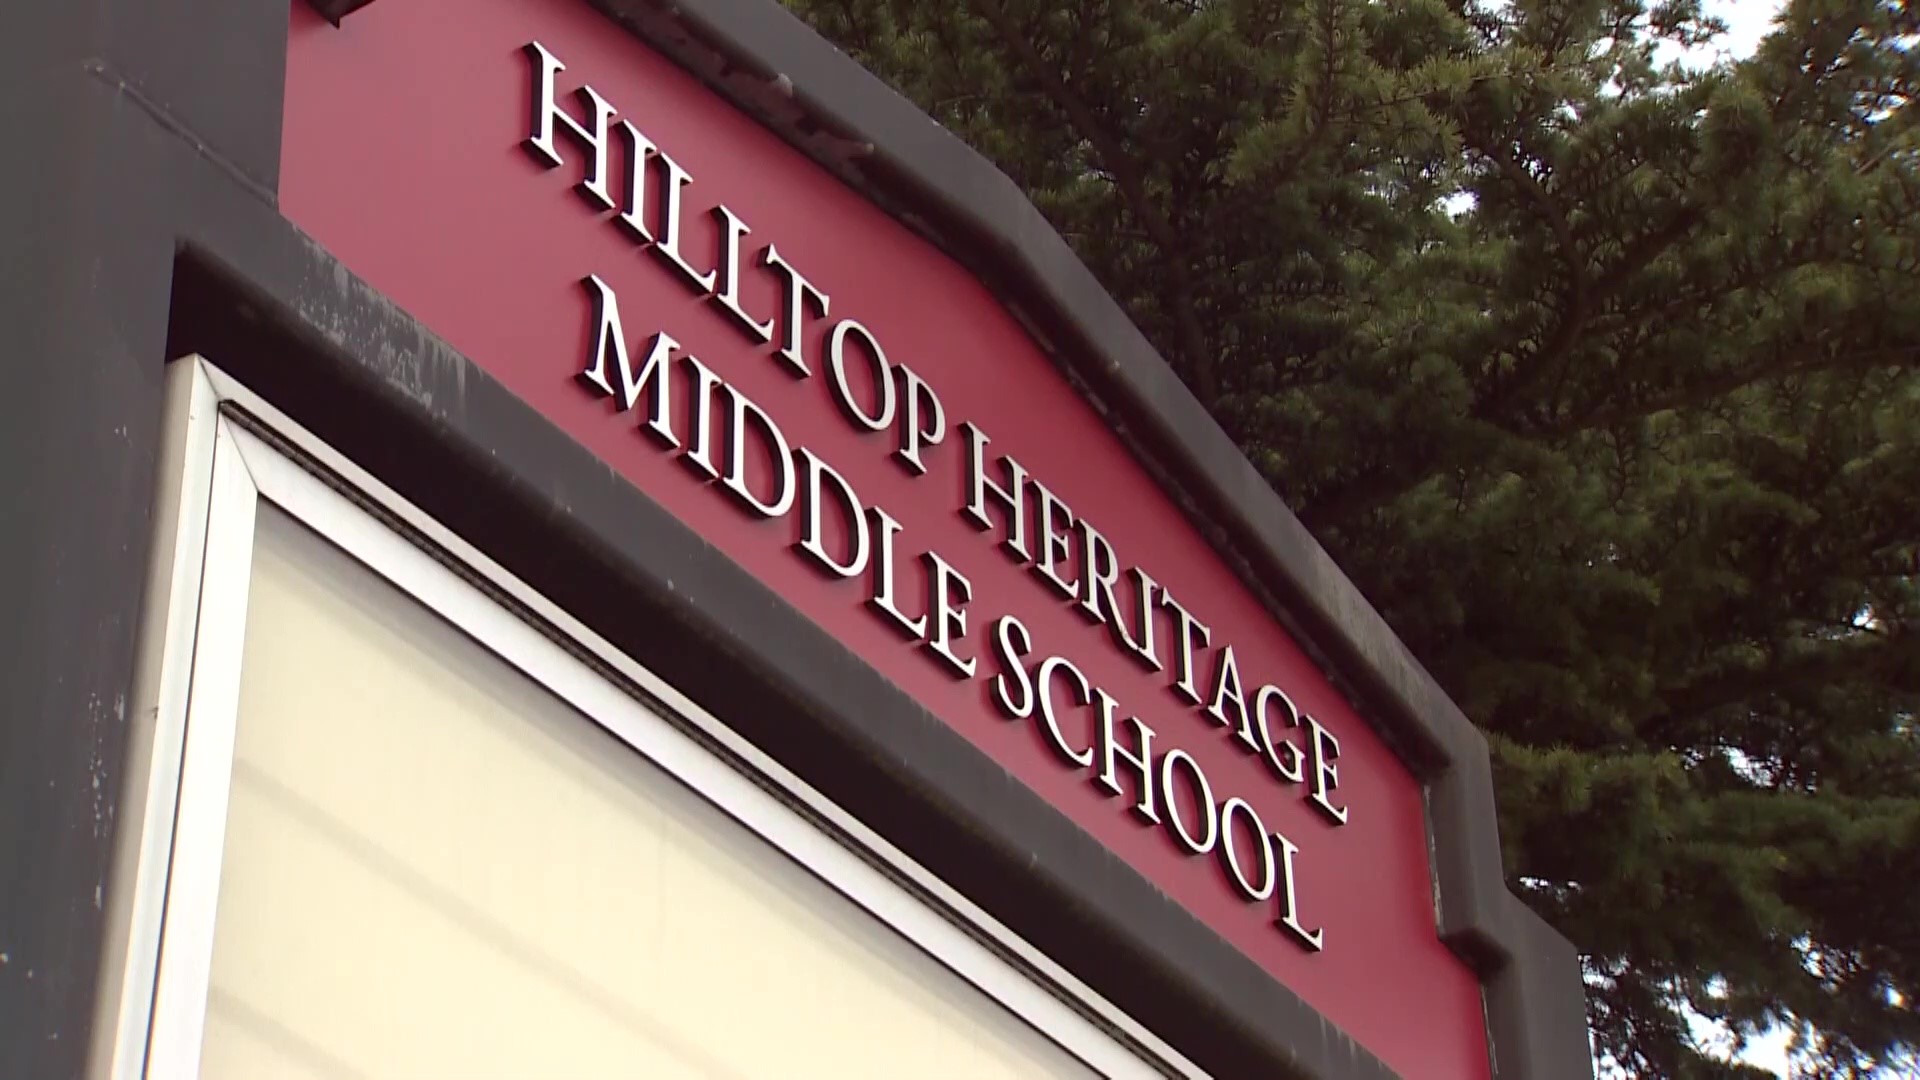 The group of kids and young adults has been stealing cars and threatening people with guns in Tacoma, including several times at Hilltop Heritage Middle School.